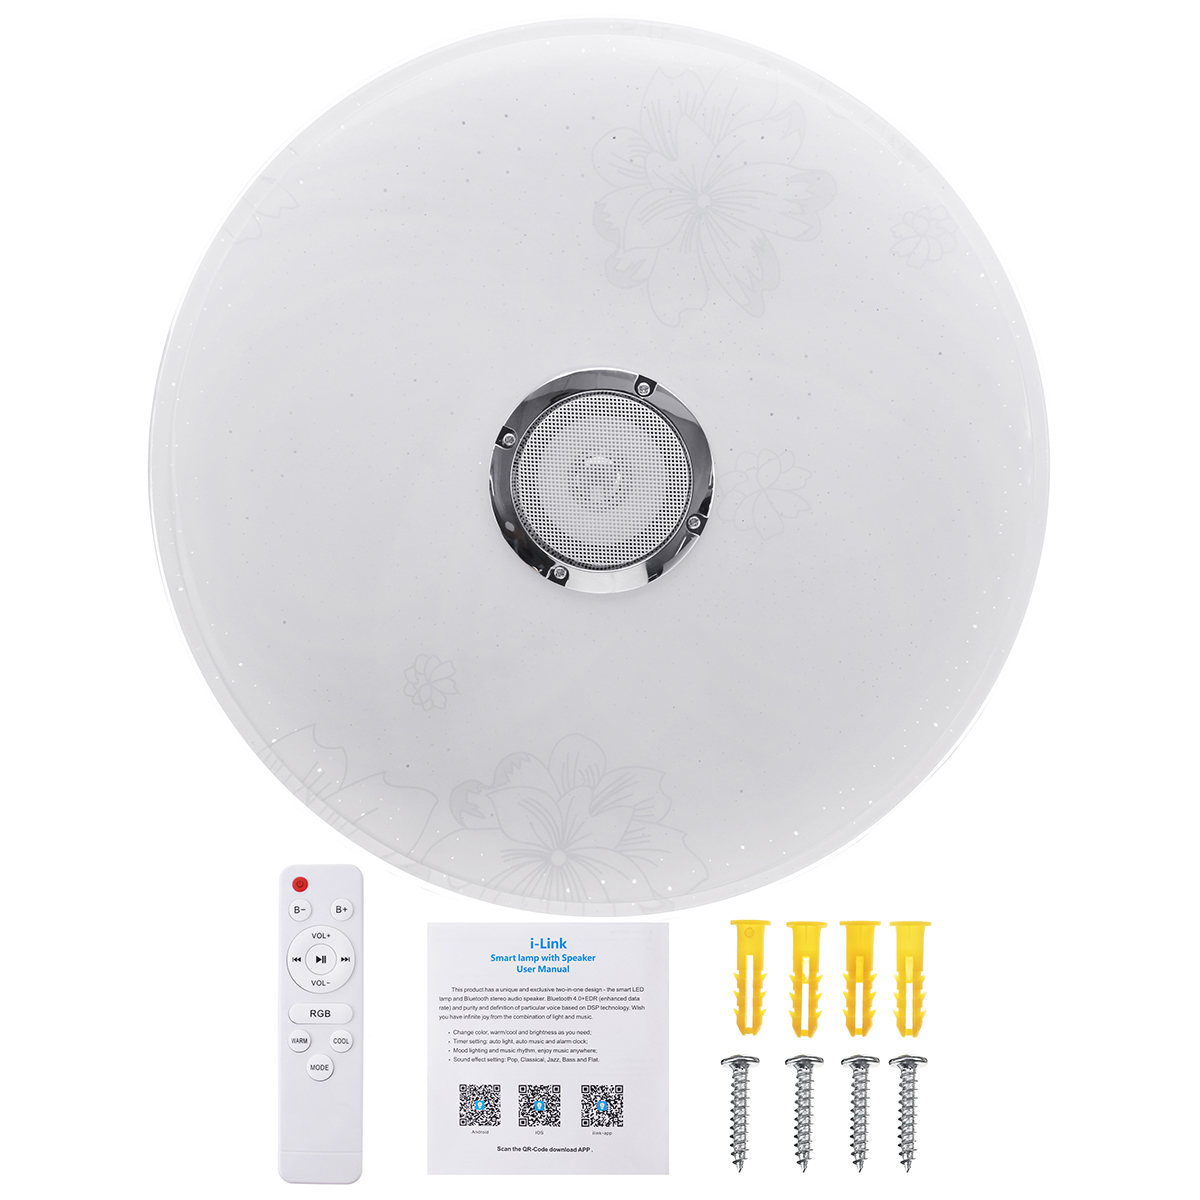 Find 16 100W LED RGB Music Ceiling Lamp bluetooth APP Remote Control Bedroom Workshop 85V 265V for Sale on Gipsybee.com with cryptocurrencies